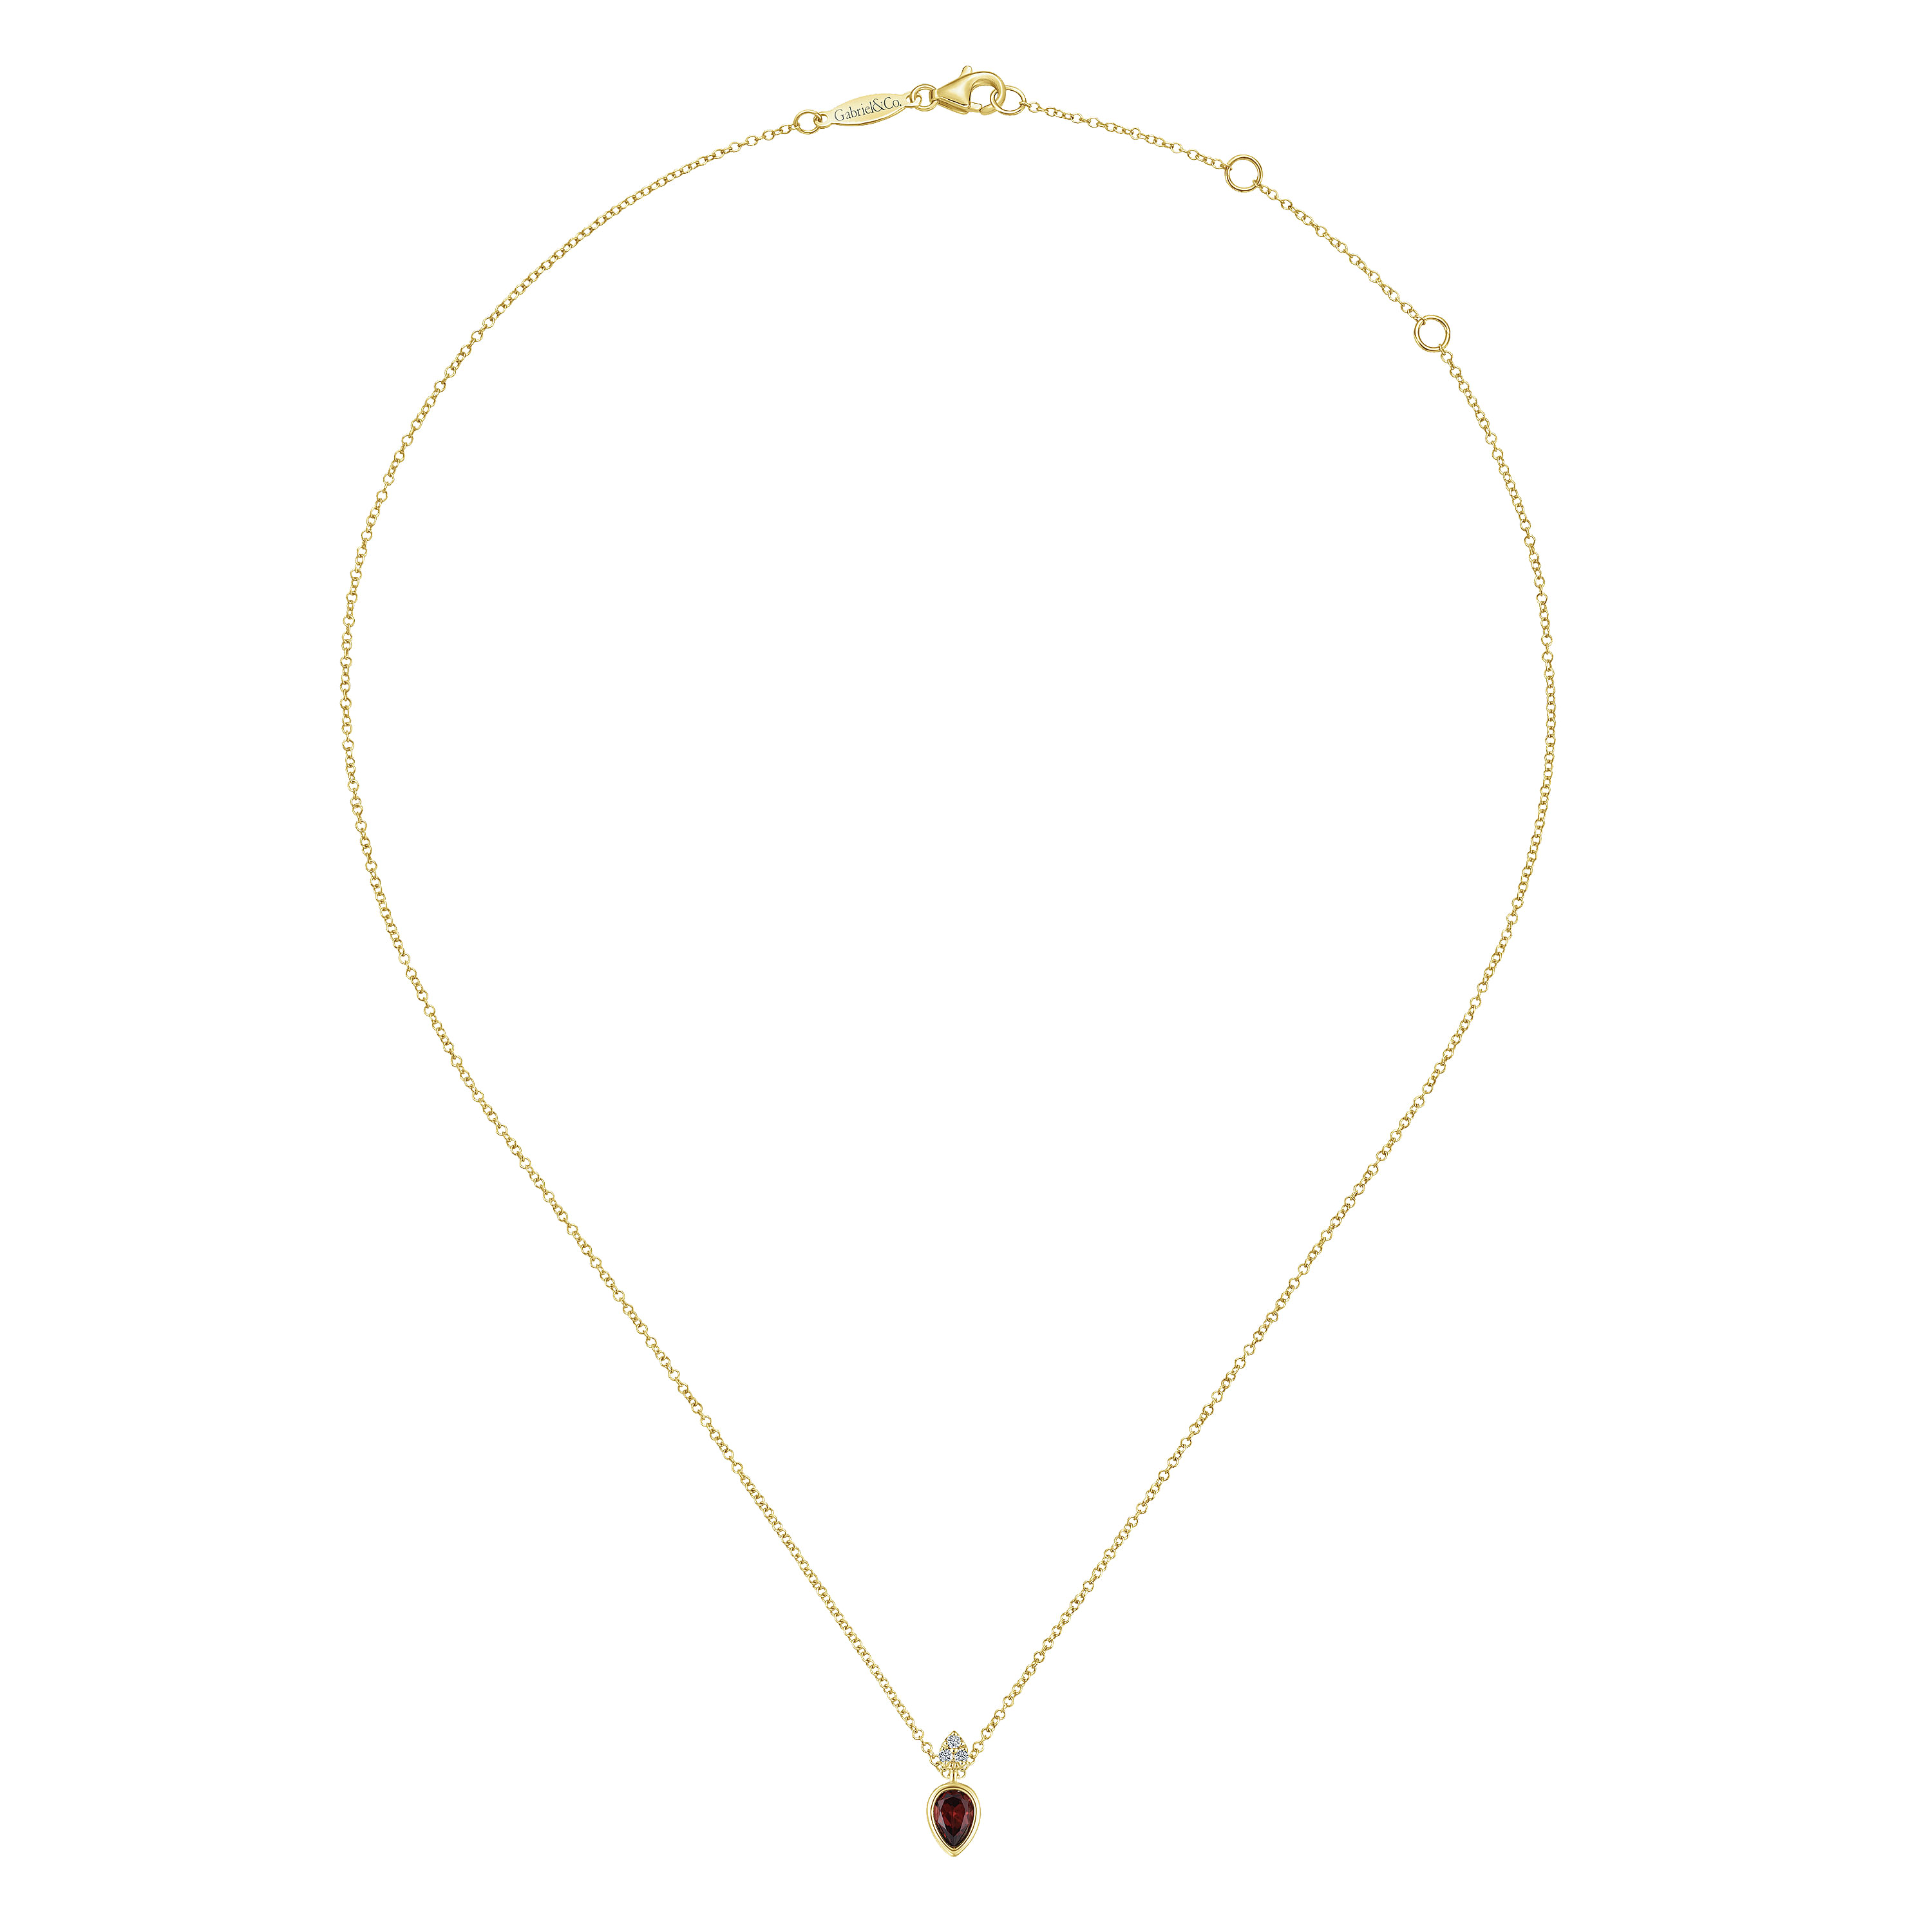 14K Yellow Gold Pear Shape Garnet Pendant Necklace with Diamond Accents